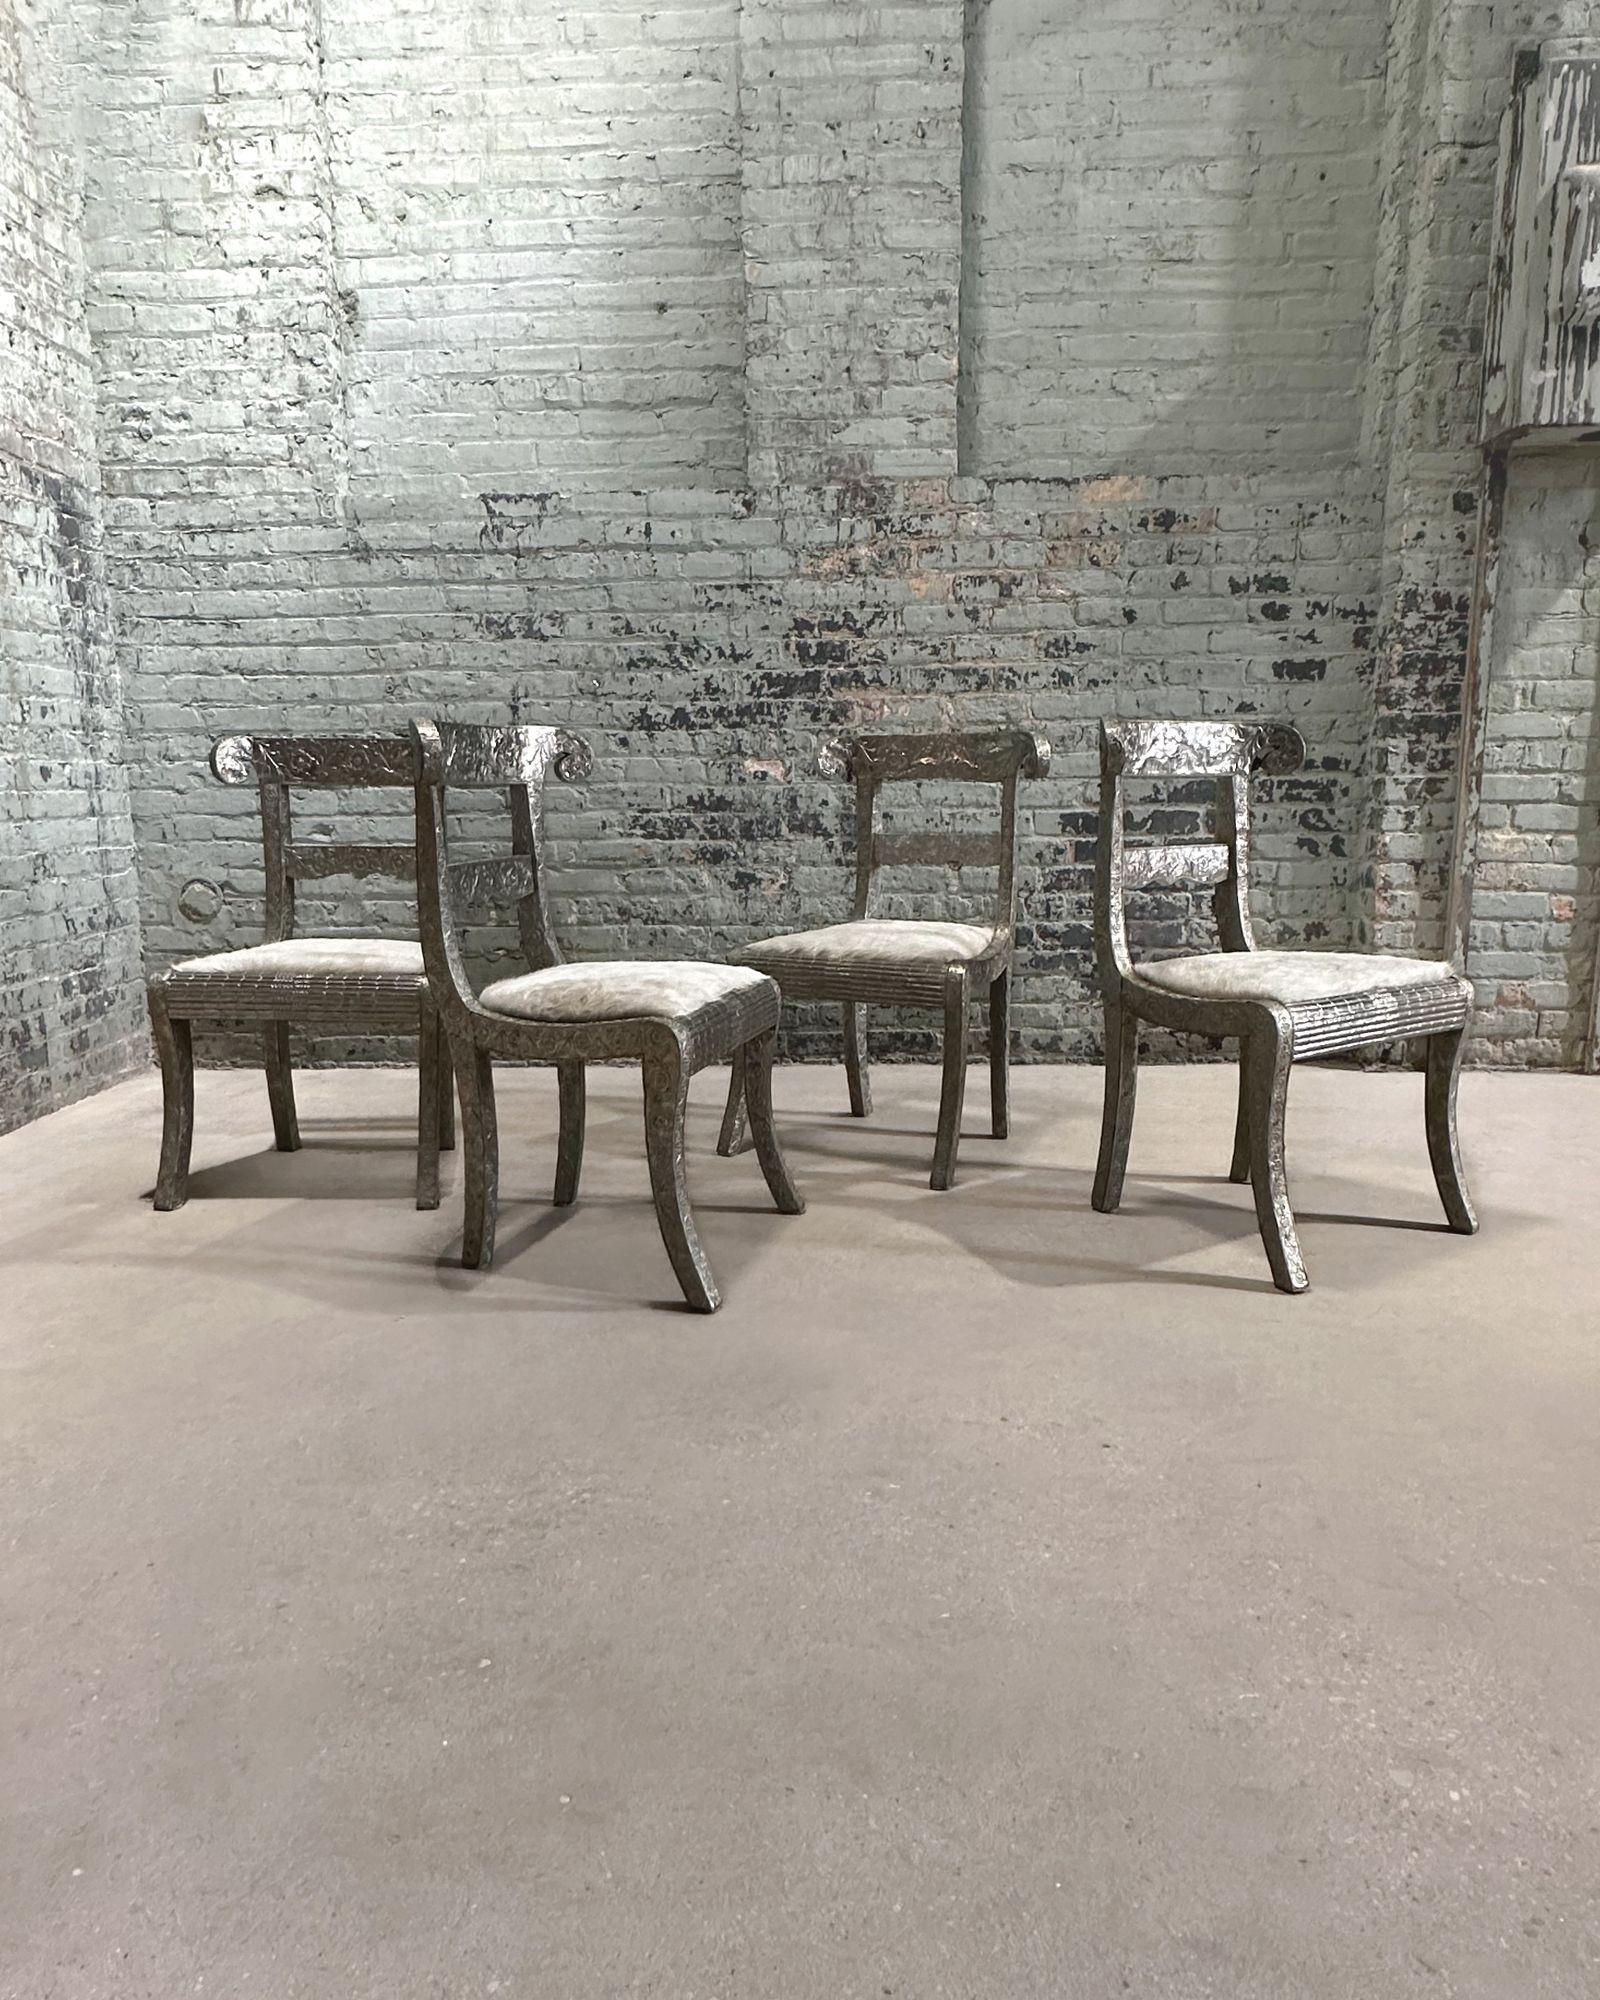 Anglo Raj Style-Indian Hammered Silver Wrapped Clad Dining Chairs w/Hair on Hide 1950's Chairs have been reupholstered. Beautiful detailing to the silver wrapping. Set of Indian chairs adorned with intricate silver metal cladding.
Measure 34